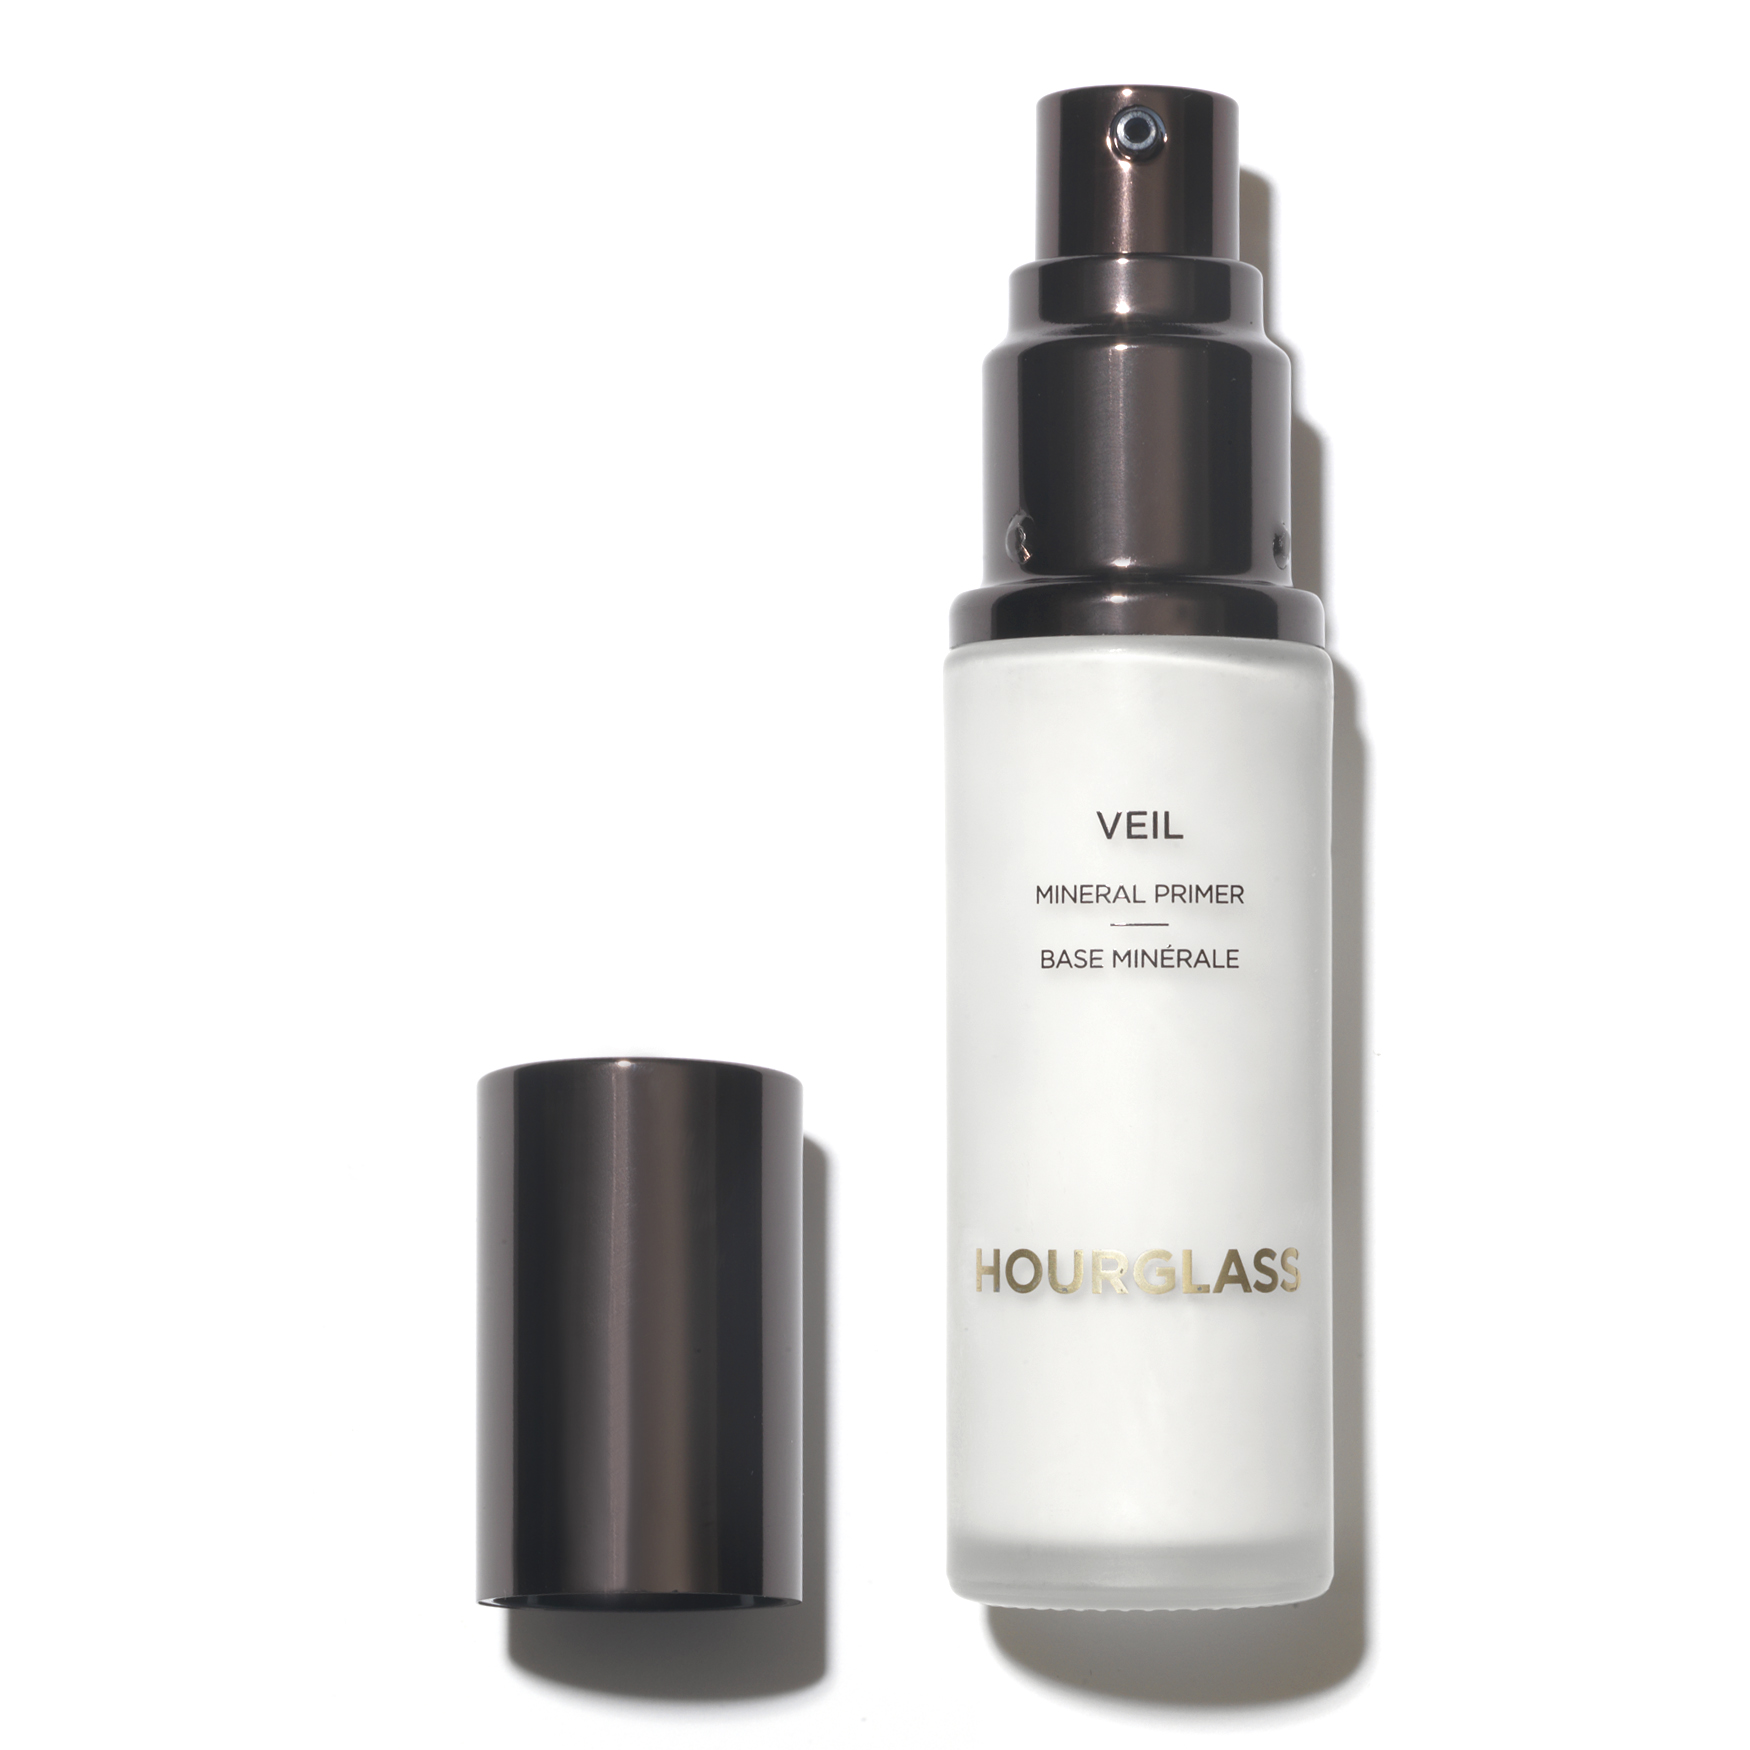 Hourglass Veil Mineral Primer SPF15 | Space NK